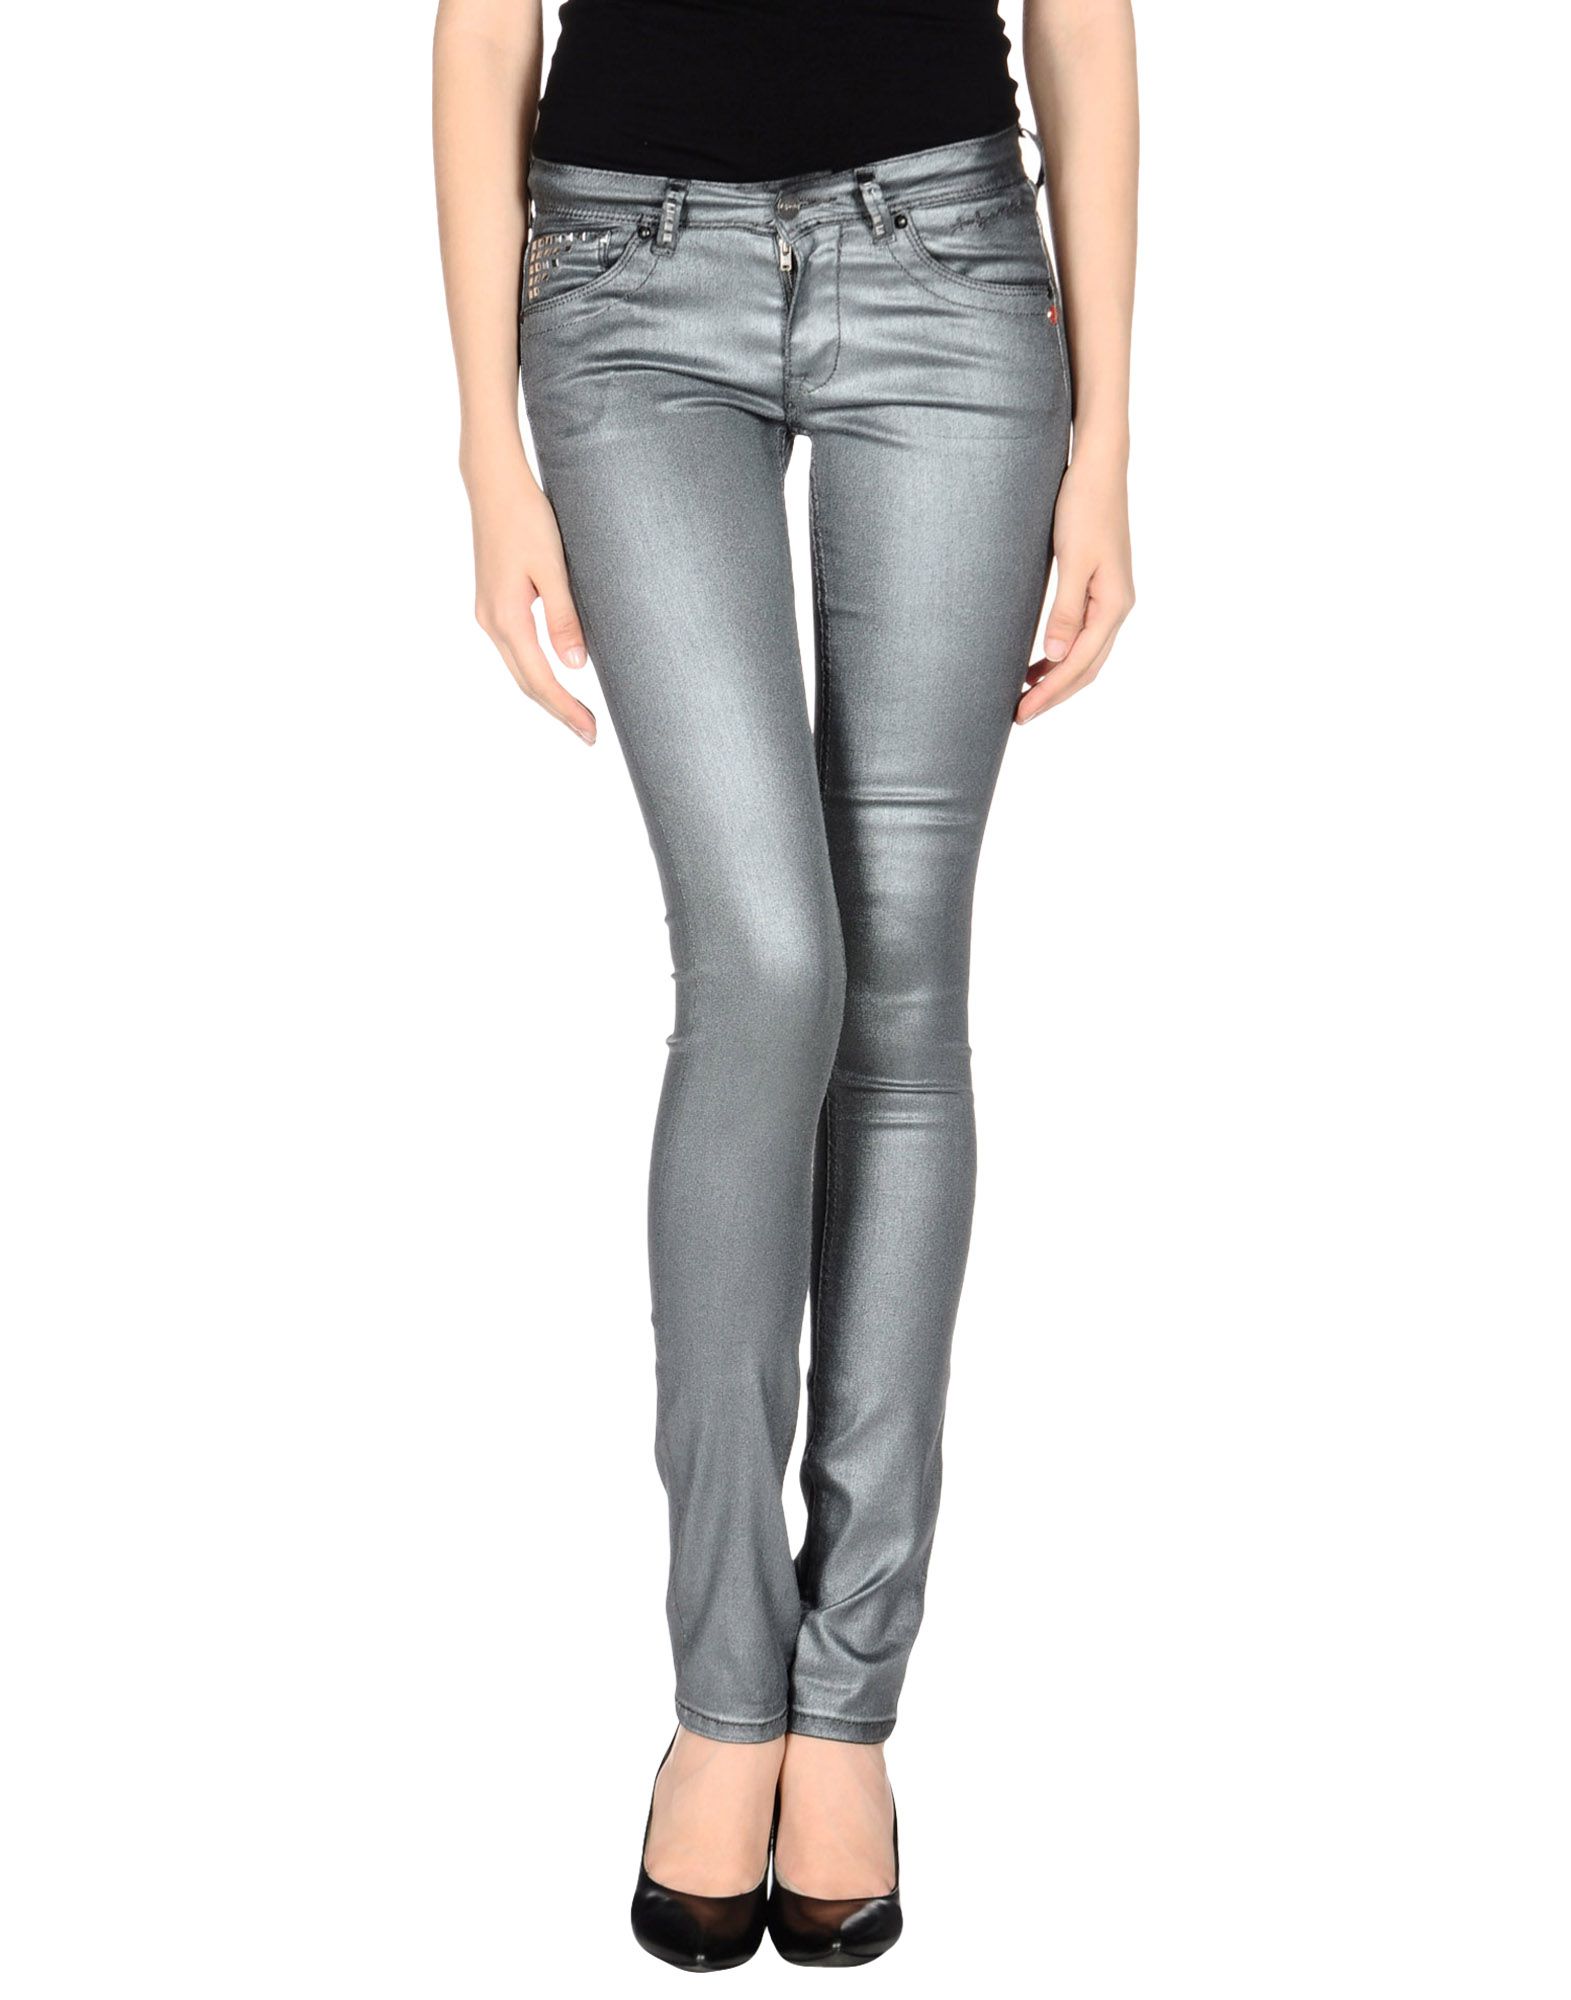 Foto andy warhol by pepe jeans pantalones vaqueros Mujer Gris foto 575312